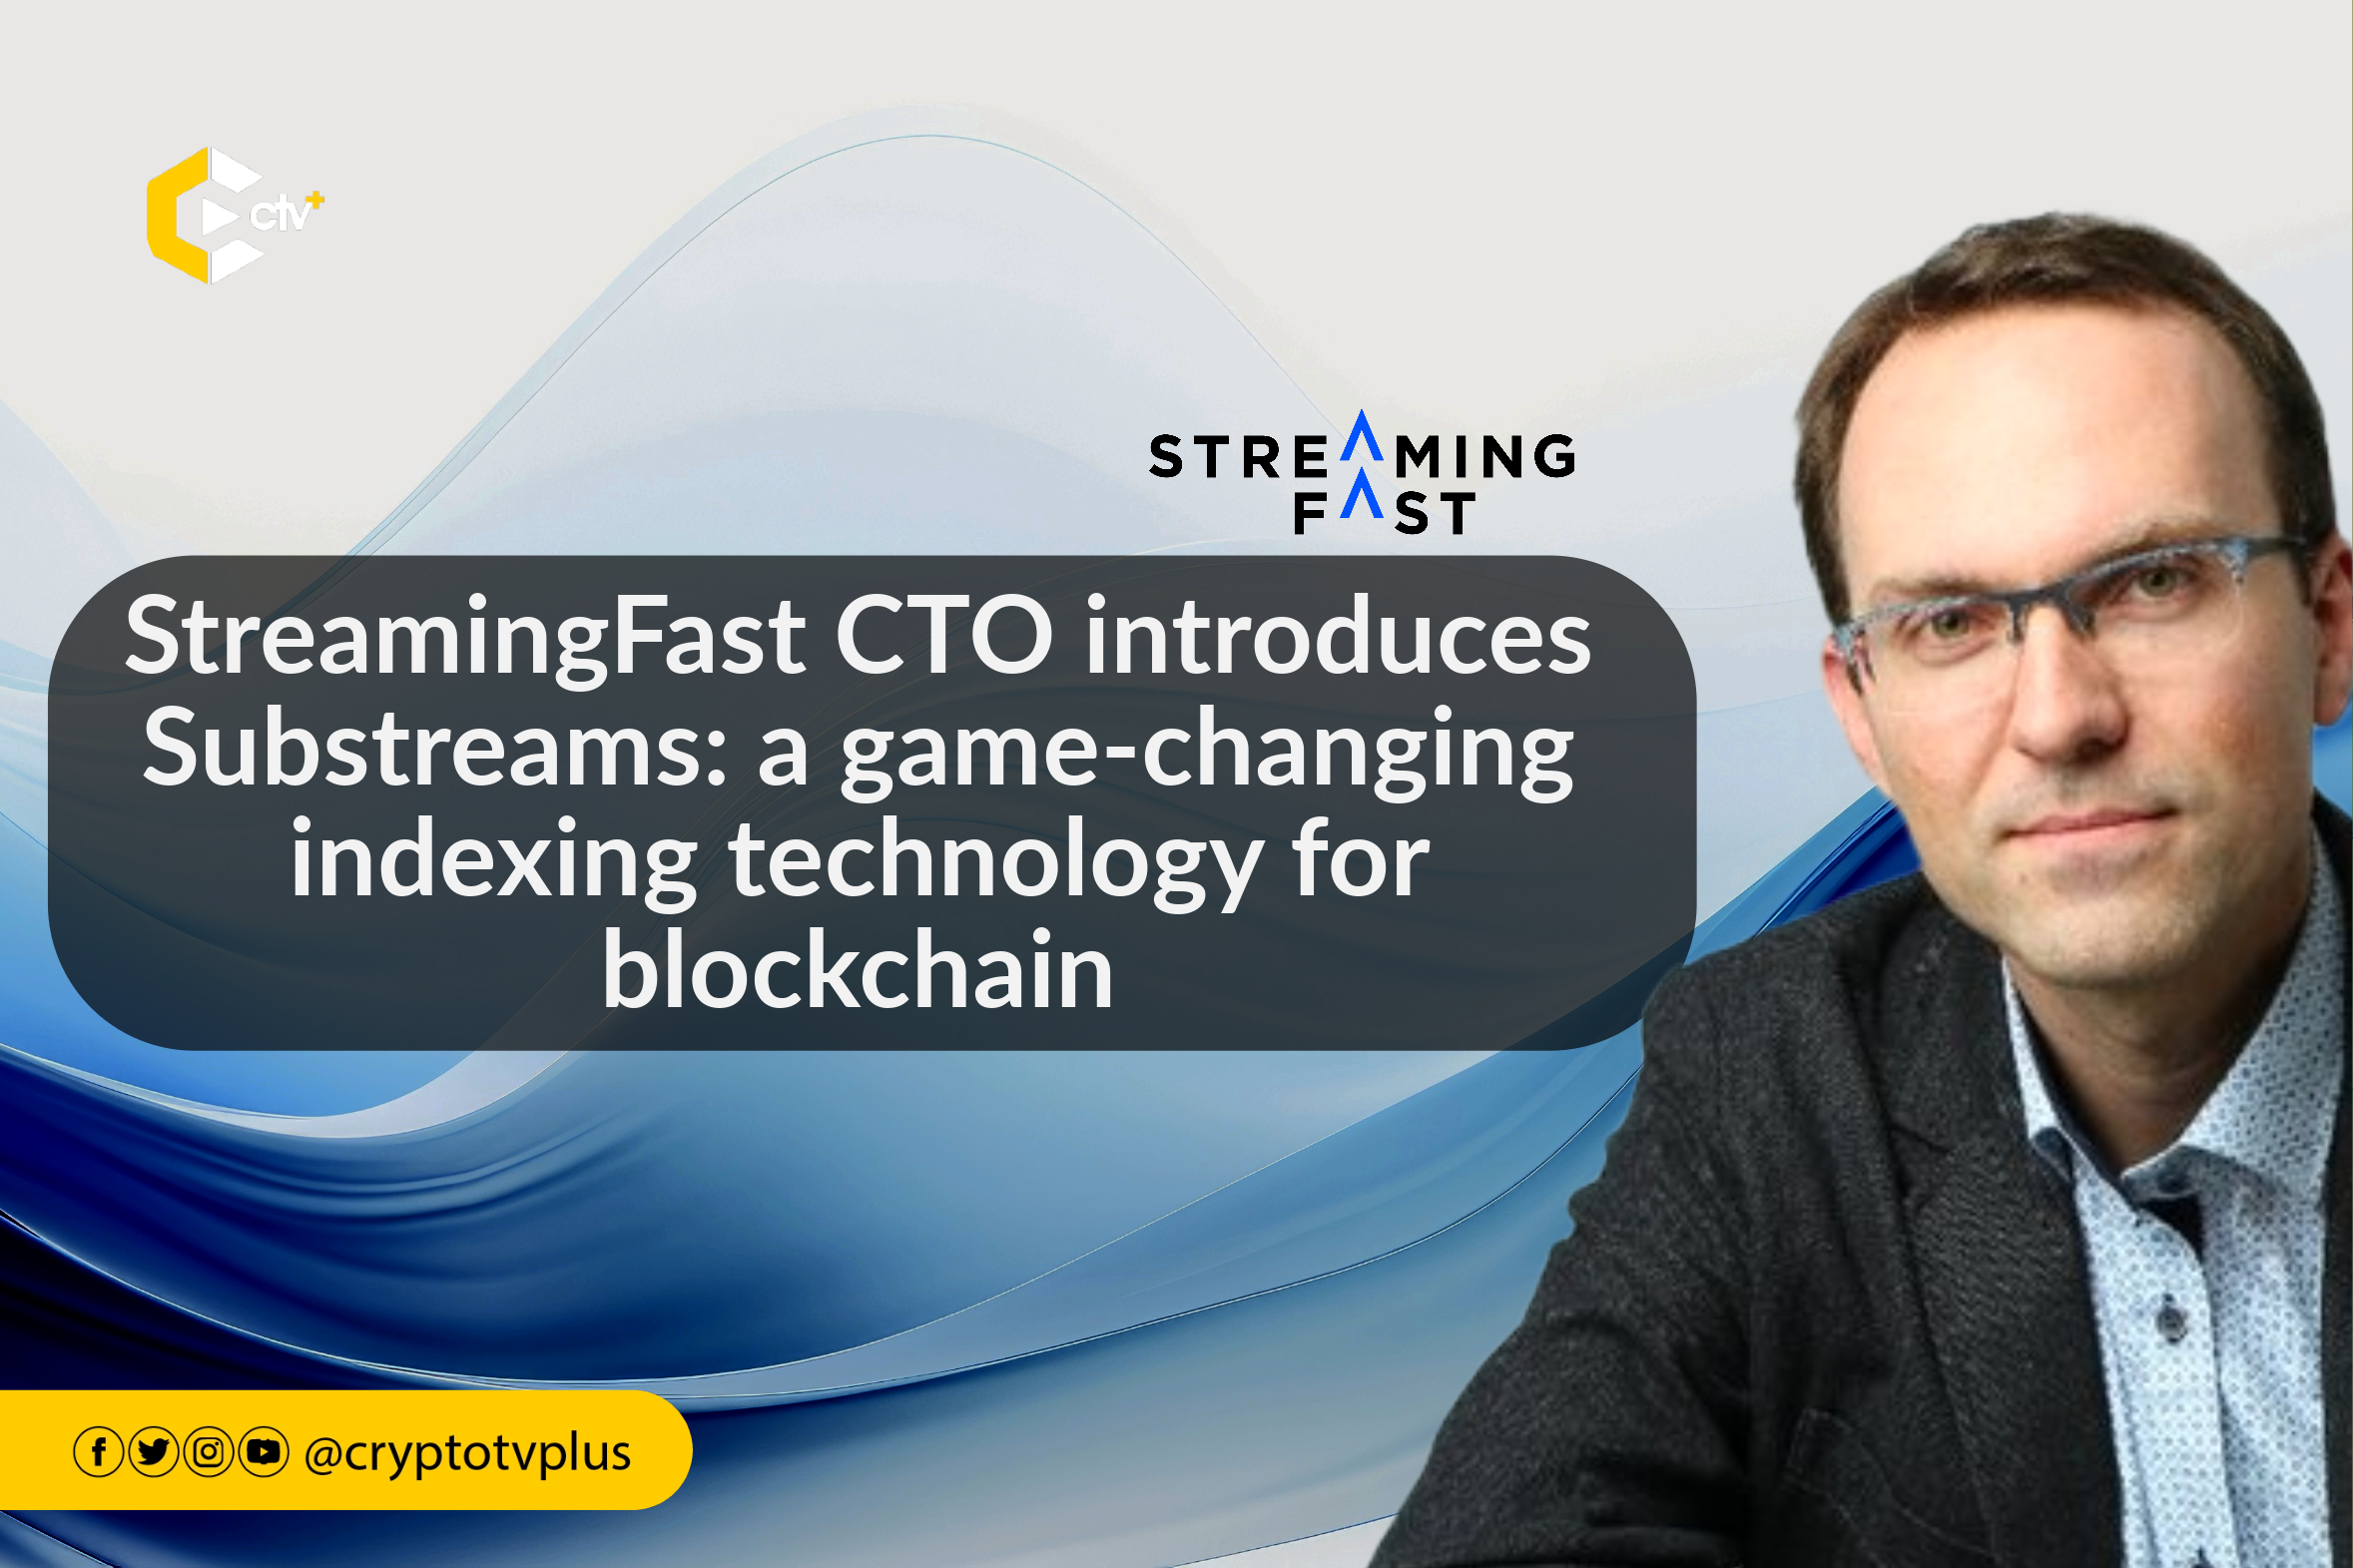 StreamingFast CTO introduces Substreams: a game-changing indexing technology for blockchain